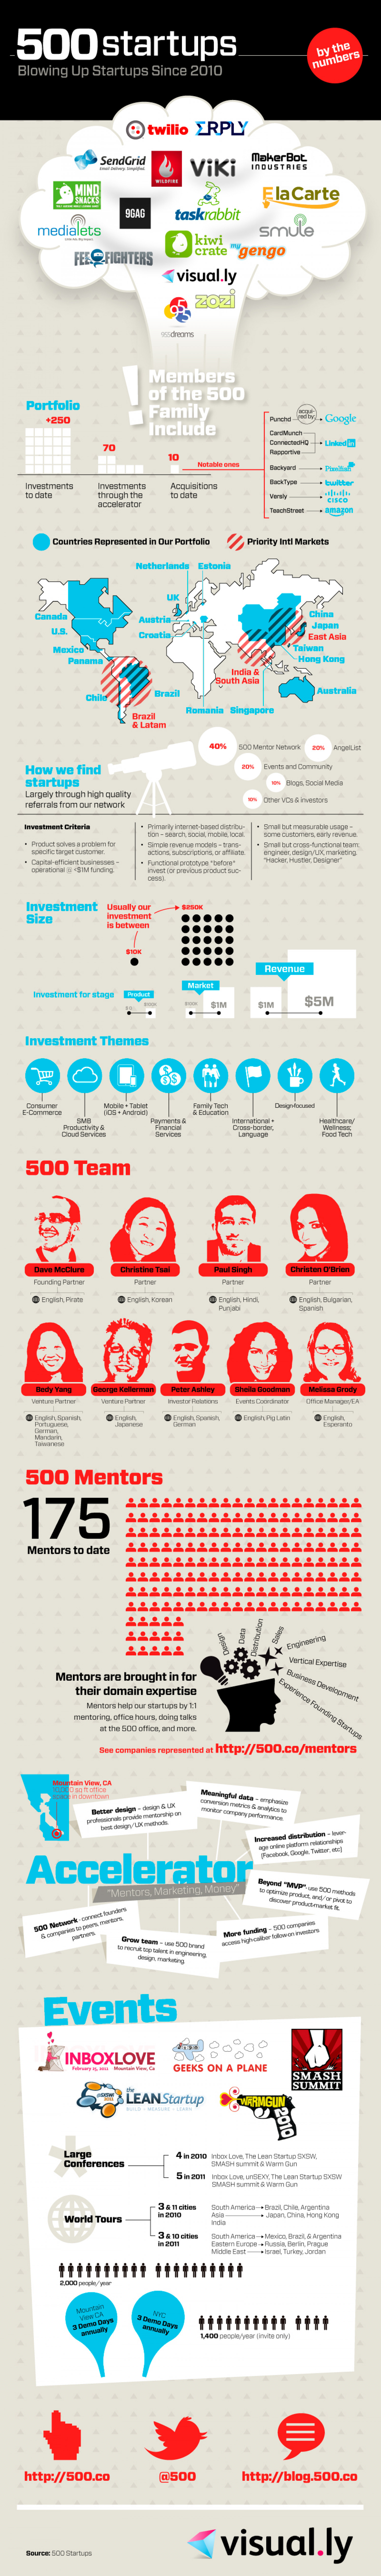 500 Startups: Blowing Up Startups Since 2010 Infographic